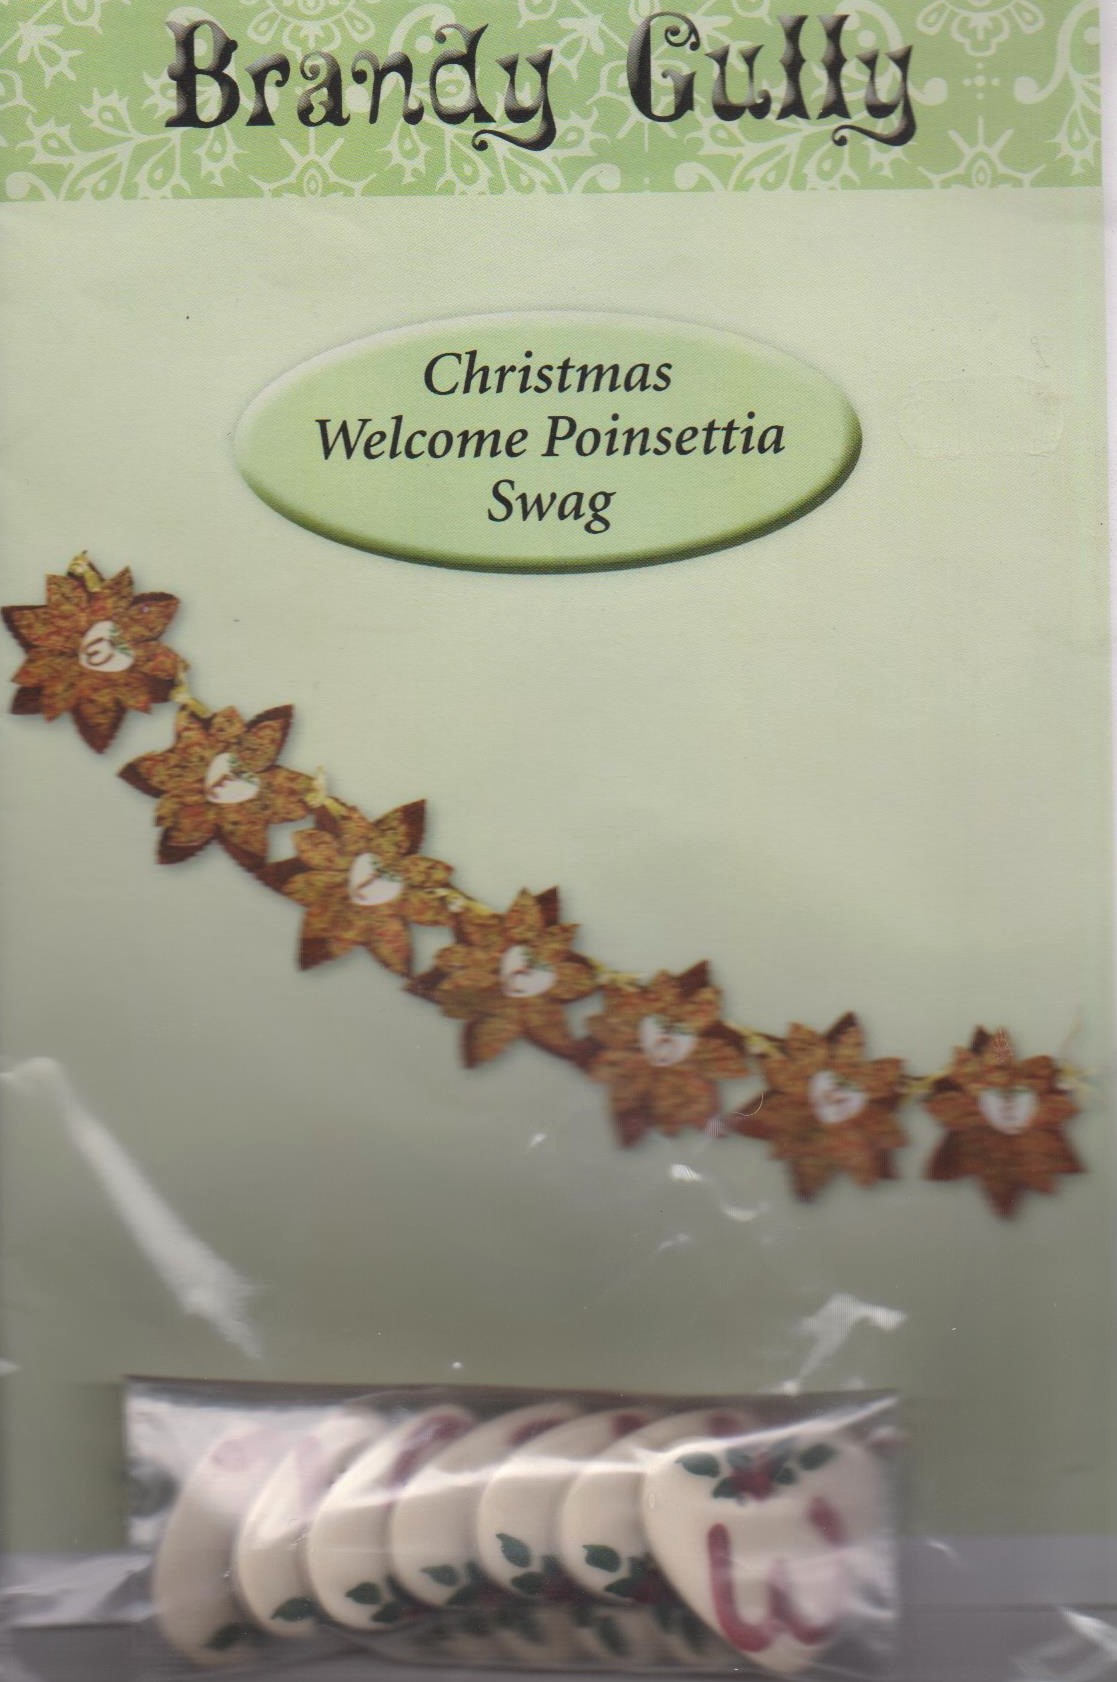 Christmas Welcome Poinsettia Swag Pattern with Buttons by Nikke Tervo from Brandy Gully